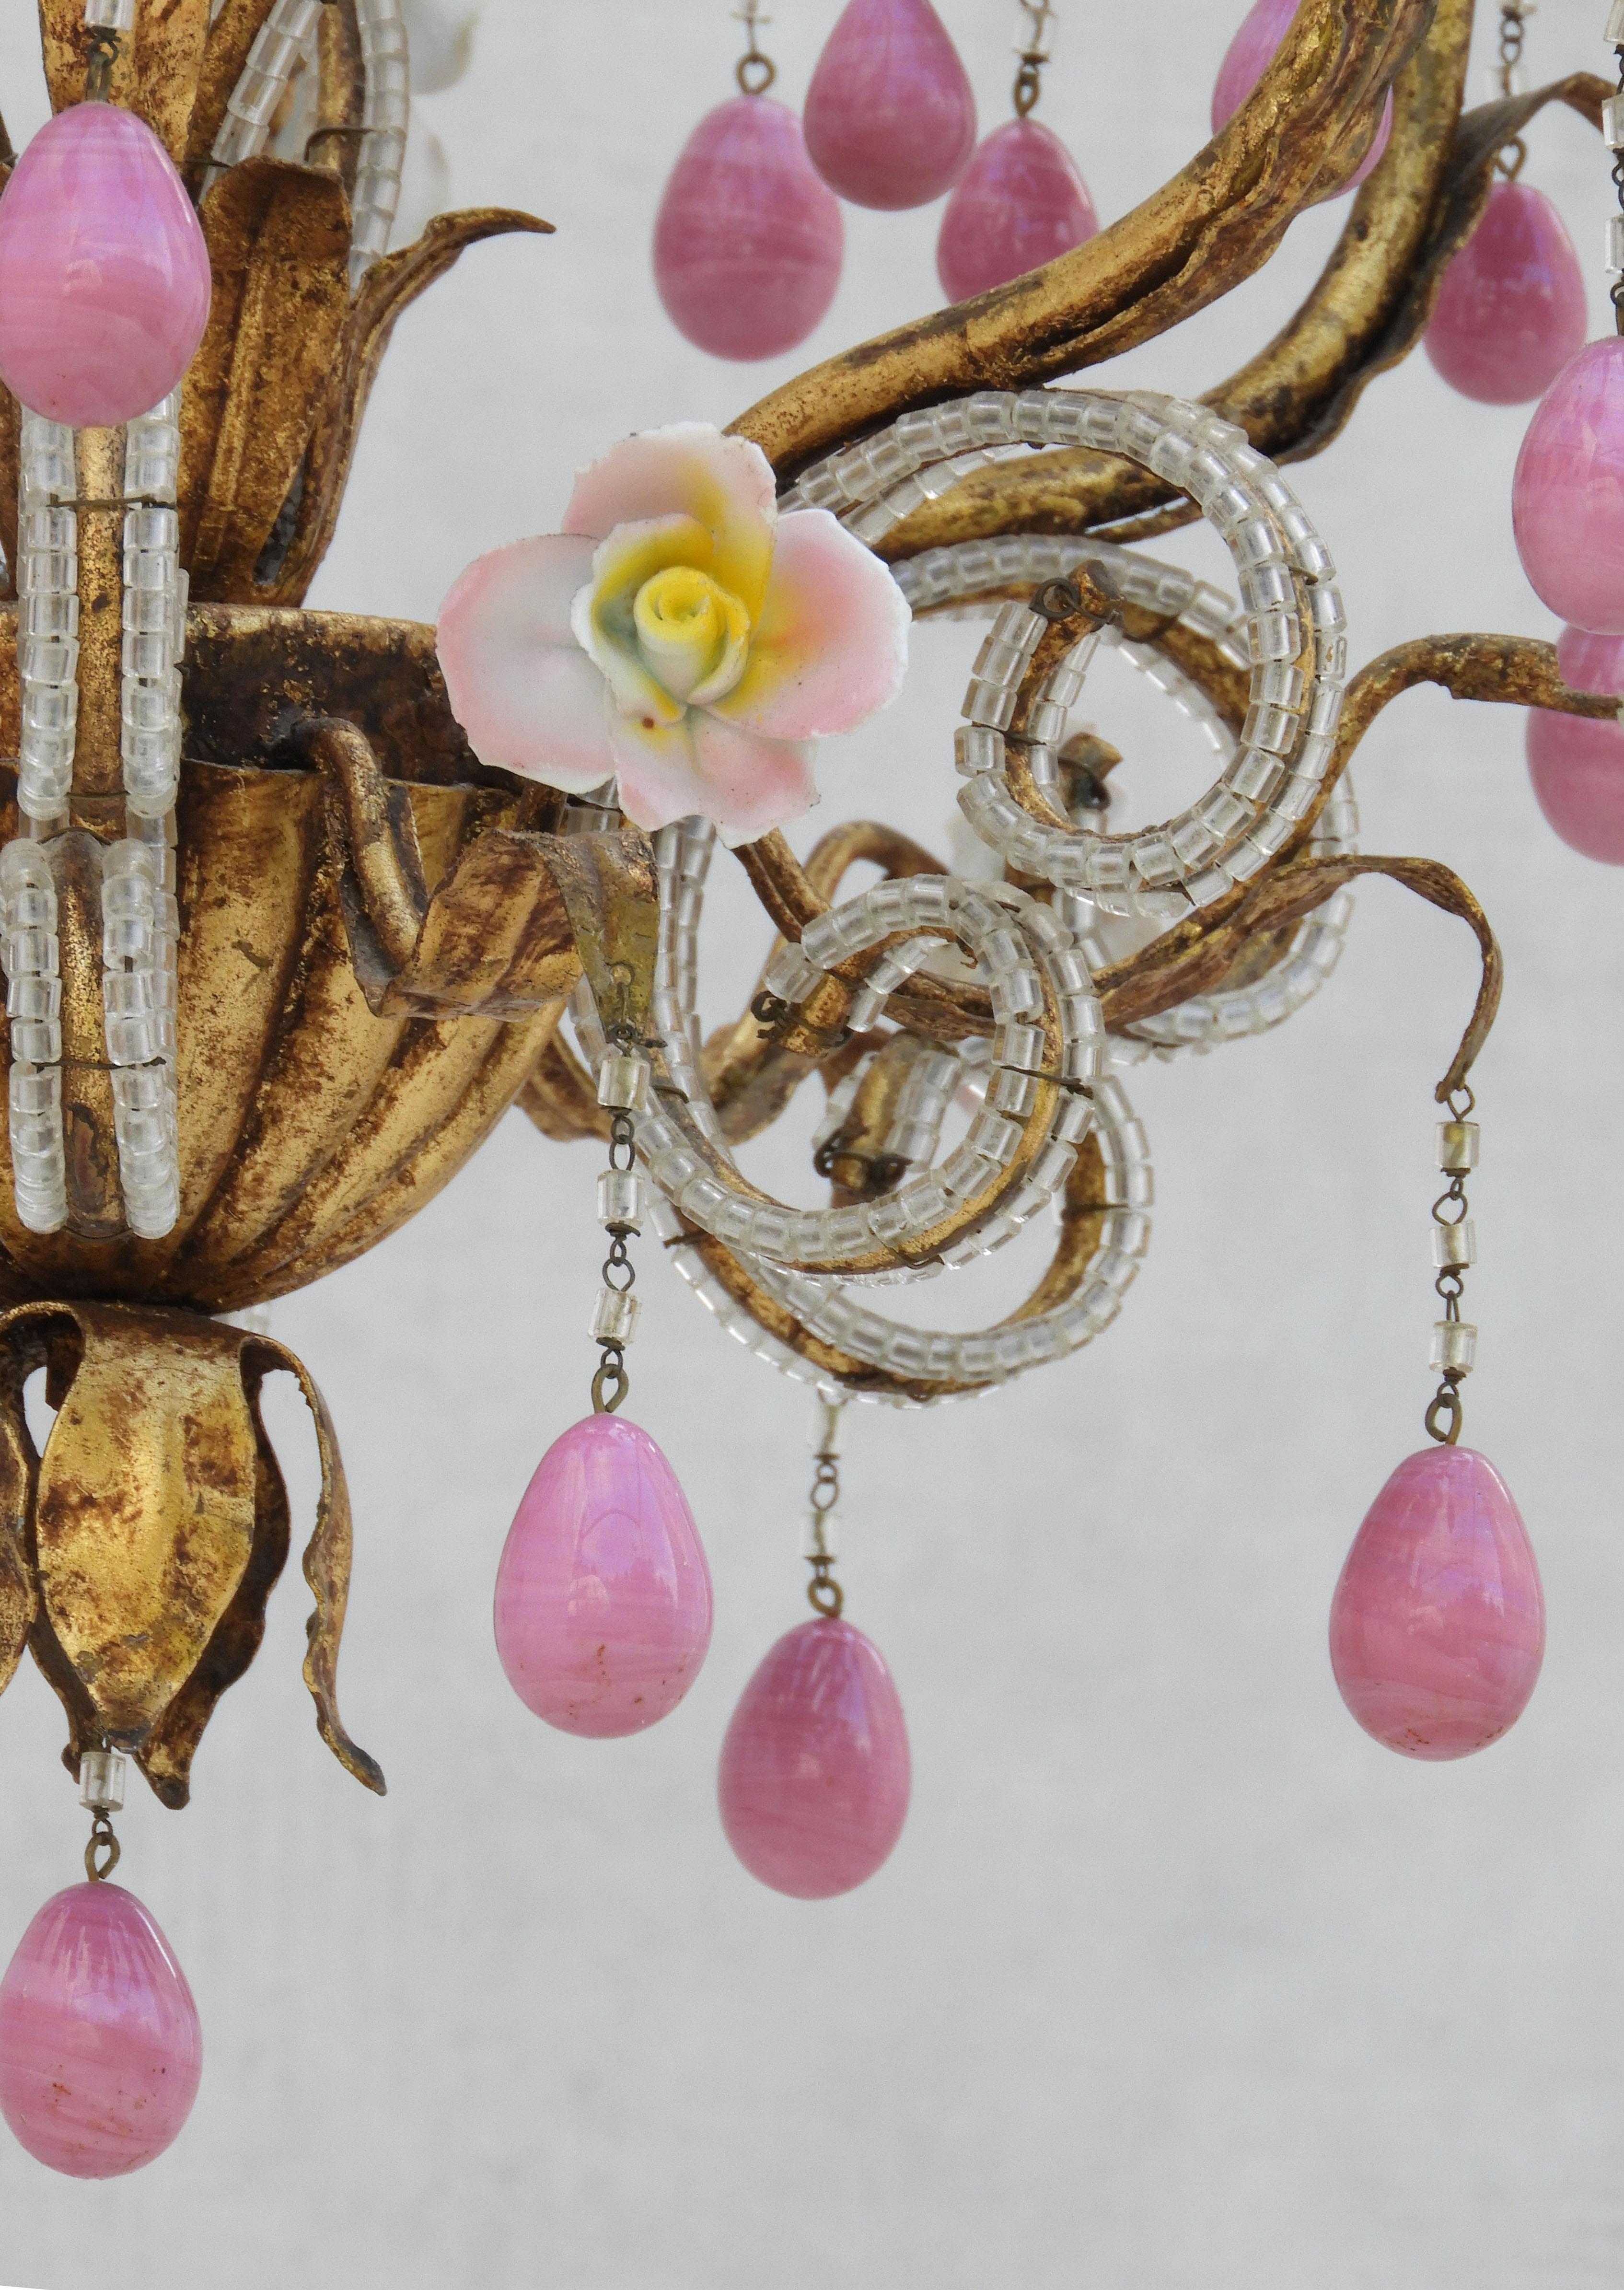 Maison Bagues Style Chandelier with Beaded Tôle, Porcelain Roses & Pink Drops In Good Condition For Sale In Trensacq, FR